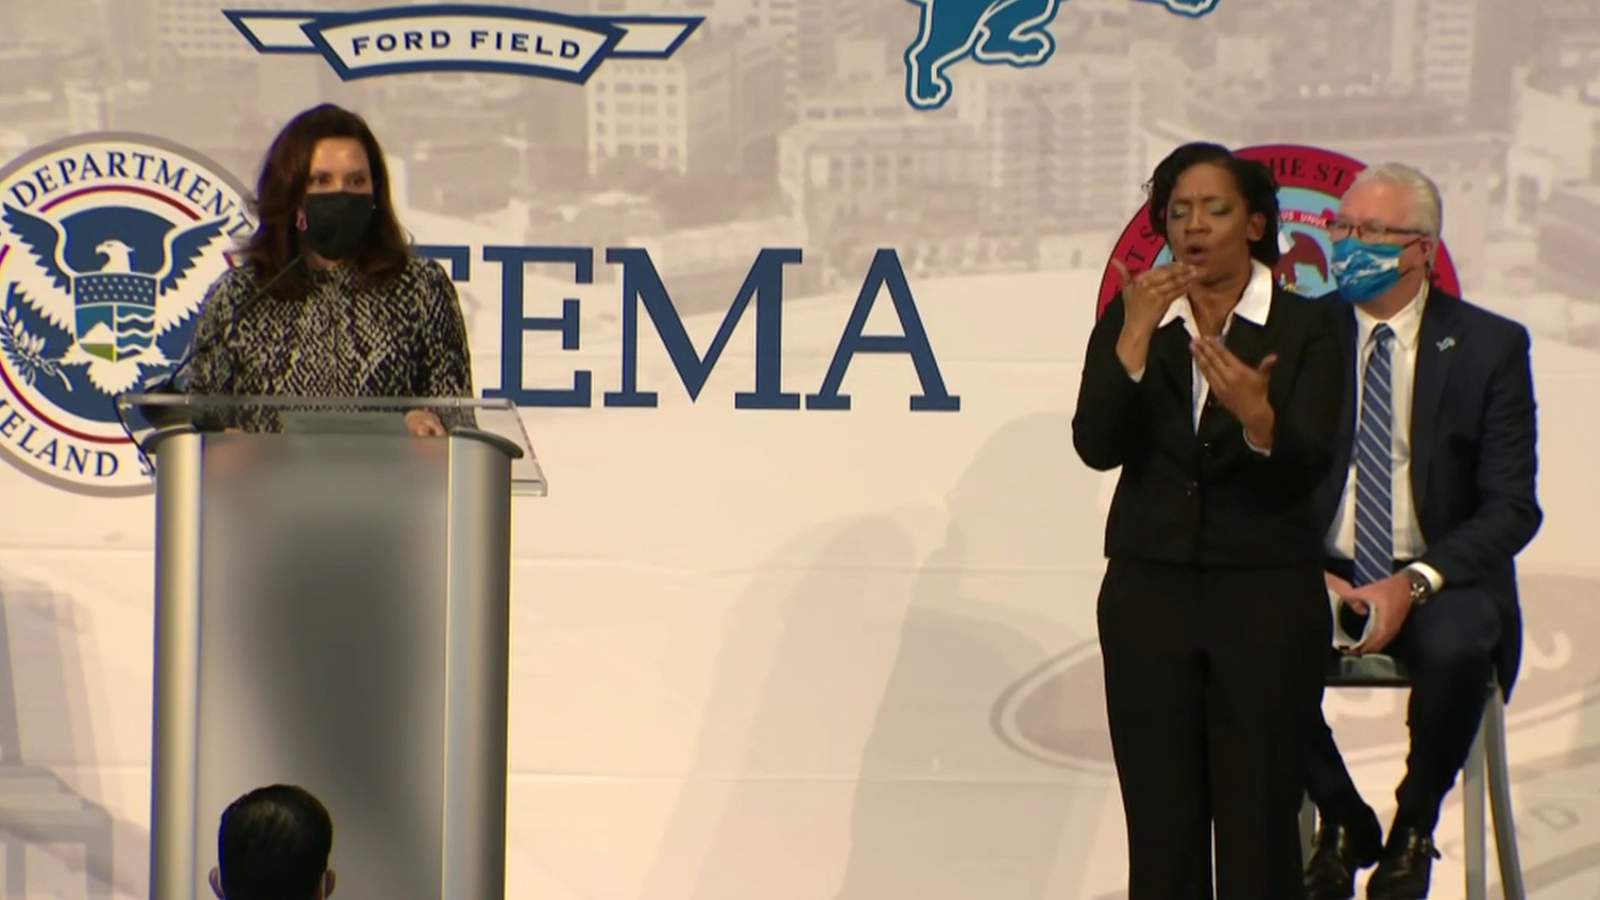 Watch: Michigan Gov. Whitmer discusses COVID-19 vaccinations from Ford Field